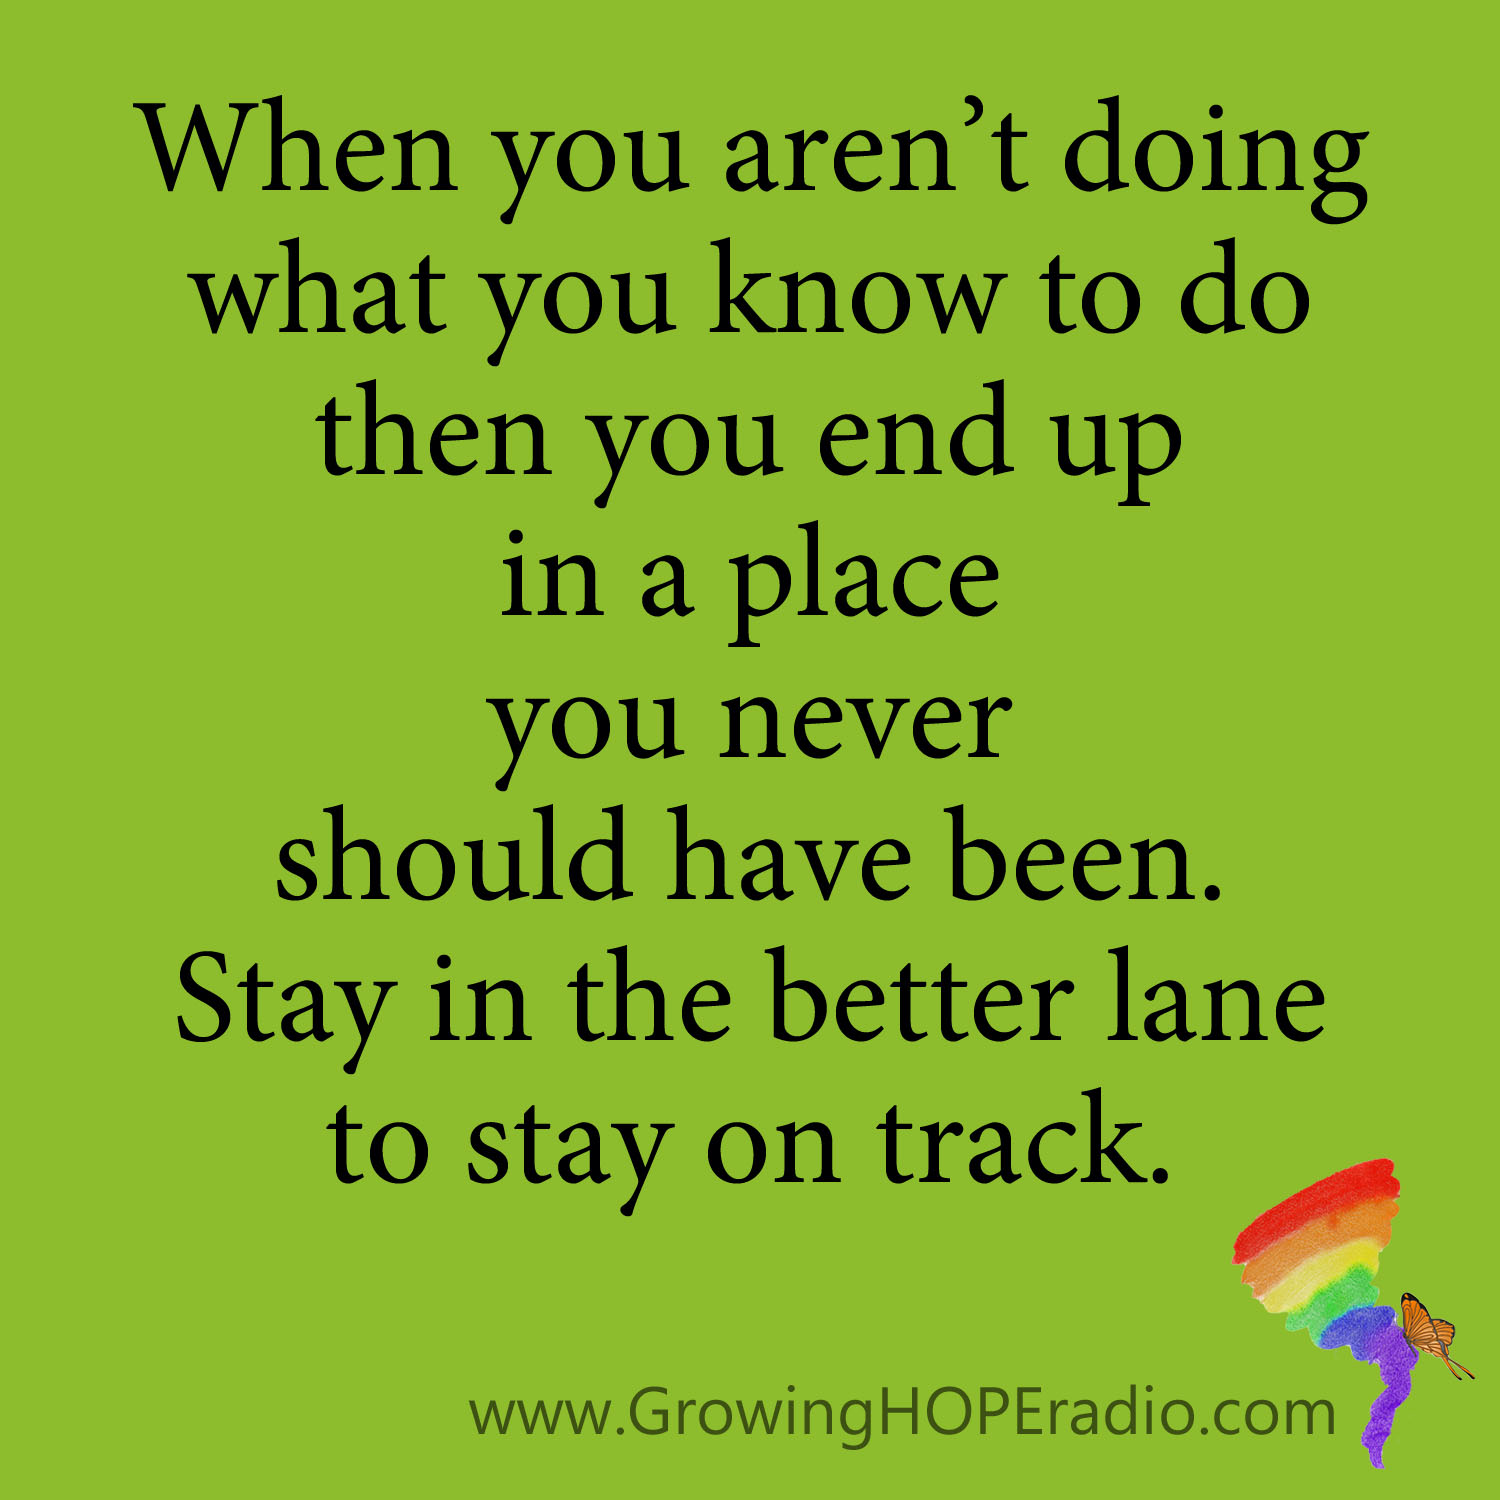 #GrowingHOPE Daily - quote - stay in the better lane